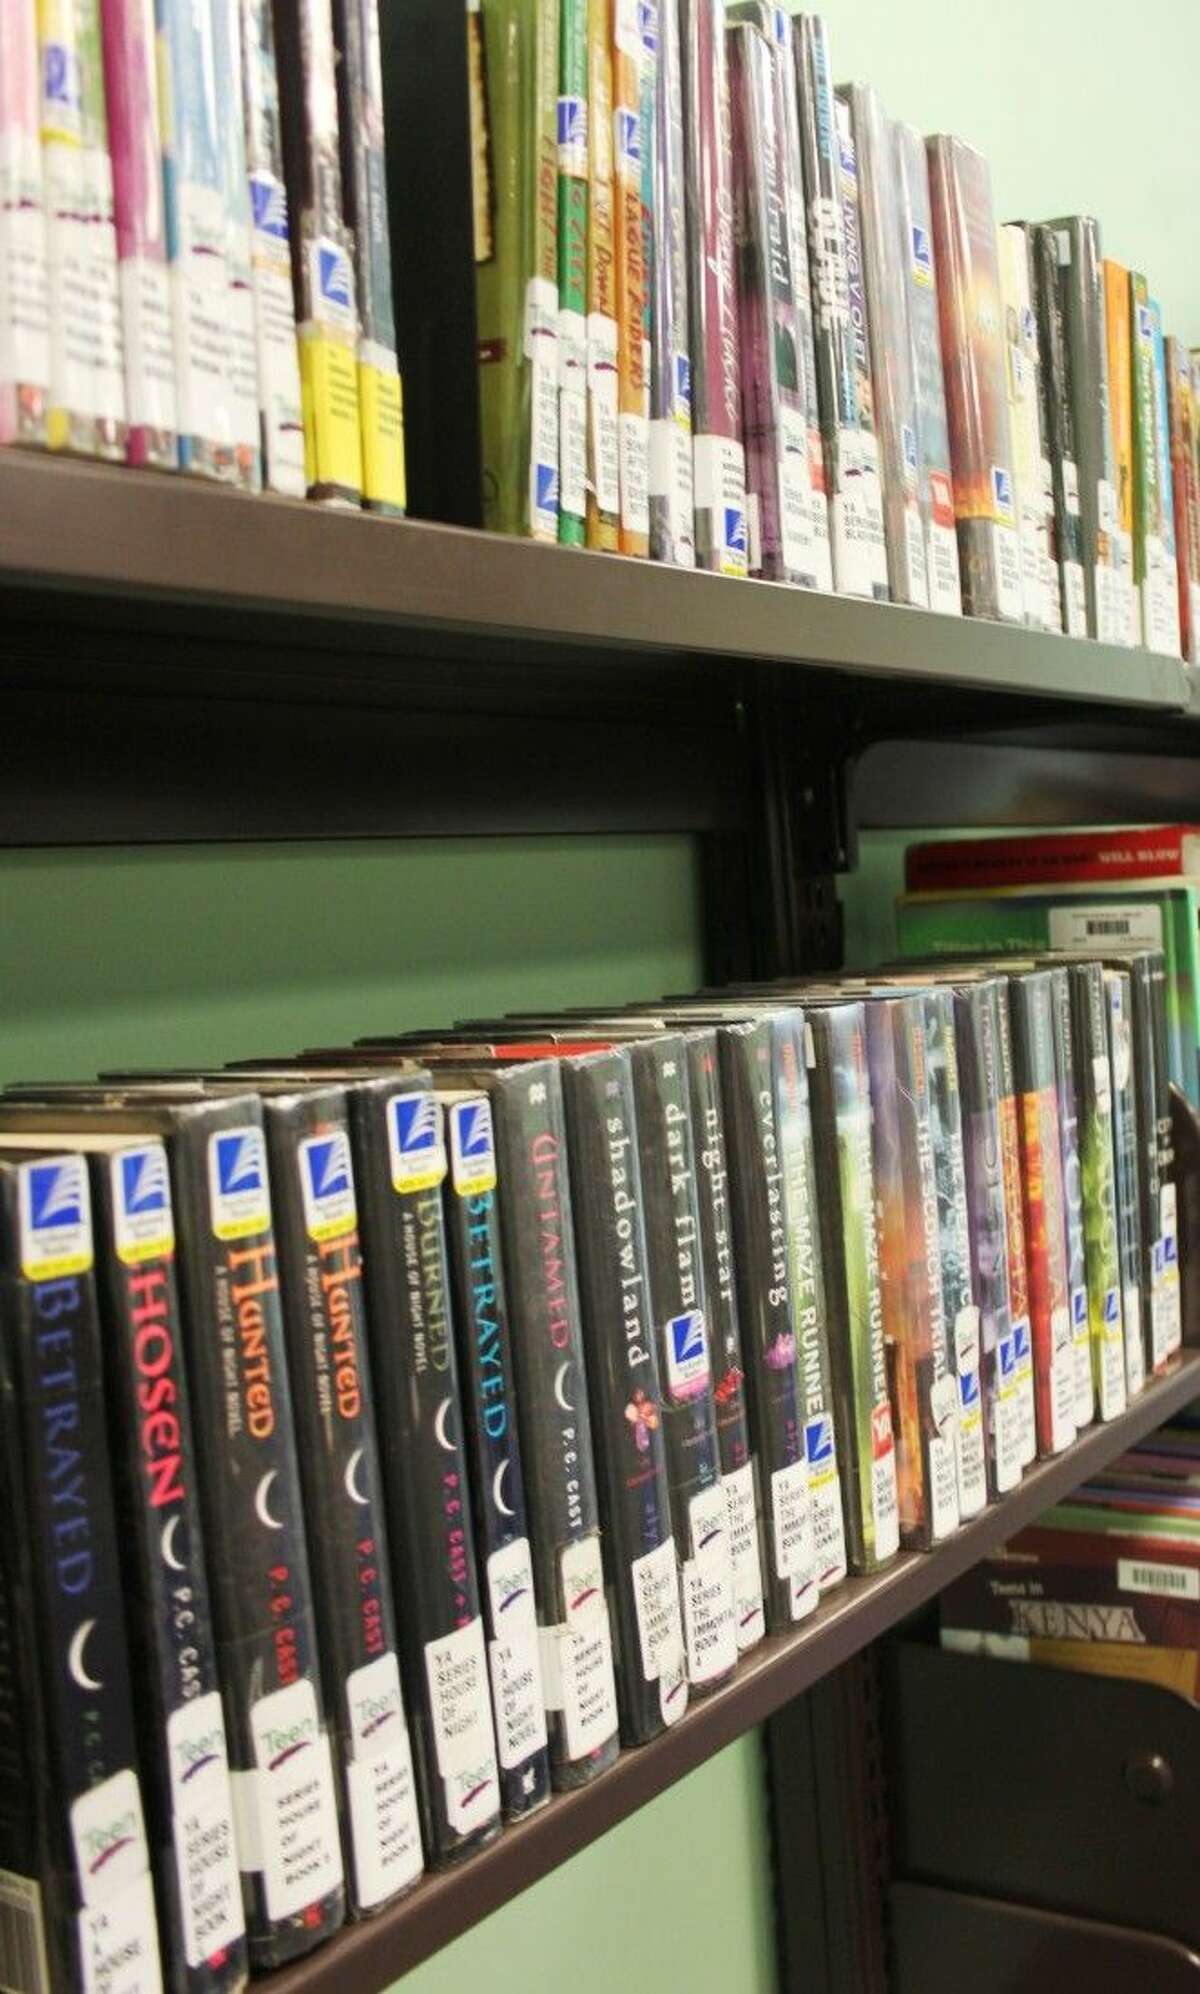 Books that deal in occult or have vampire characters are being questioned by Shepherd minister, Phillip Missick, who is circulating a petition to have certain books removed from the teen section at Austin Memorial Library in Cleveland.